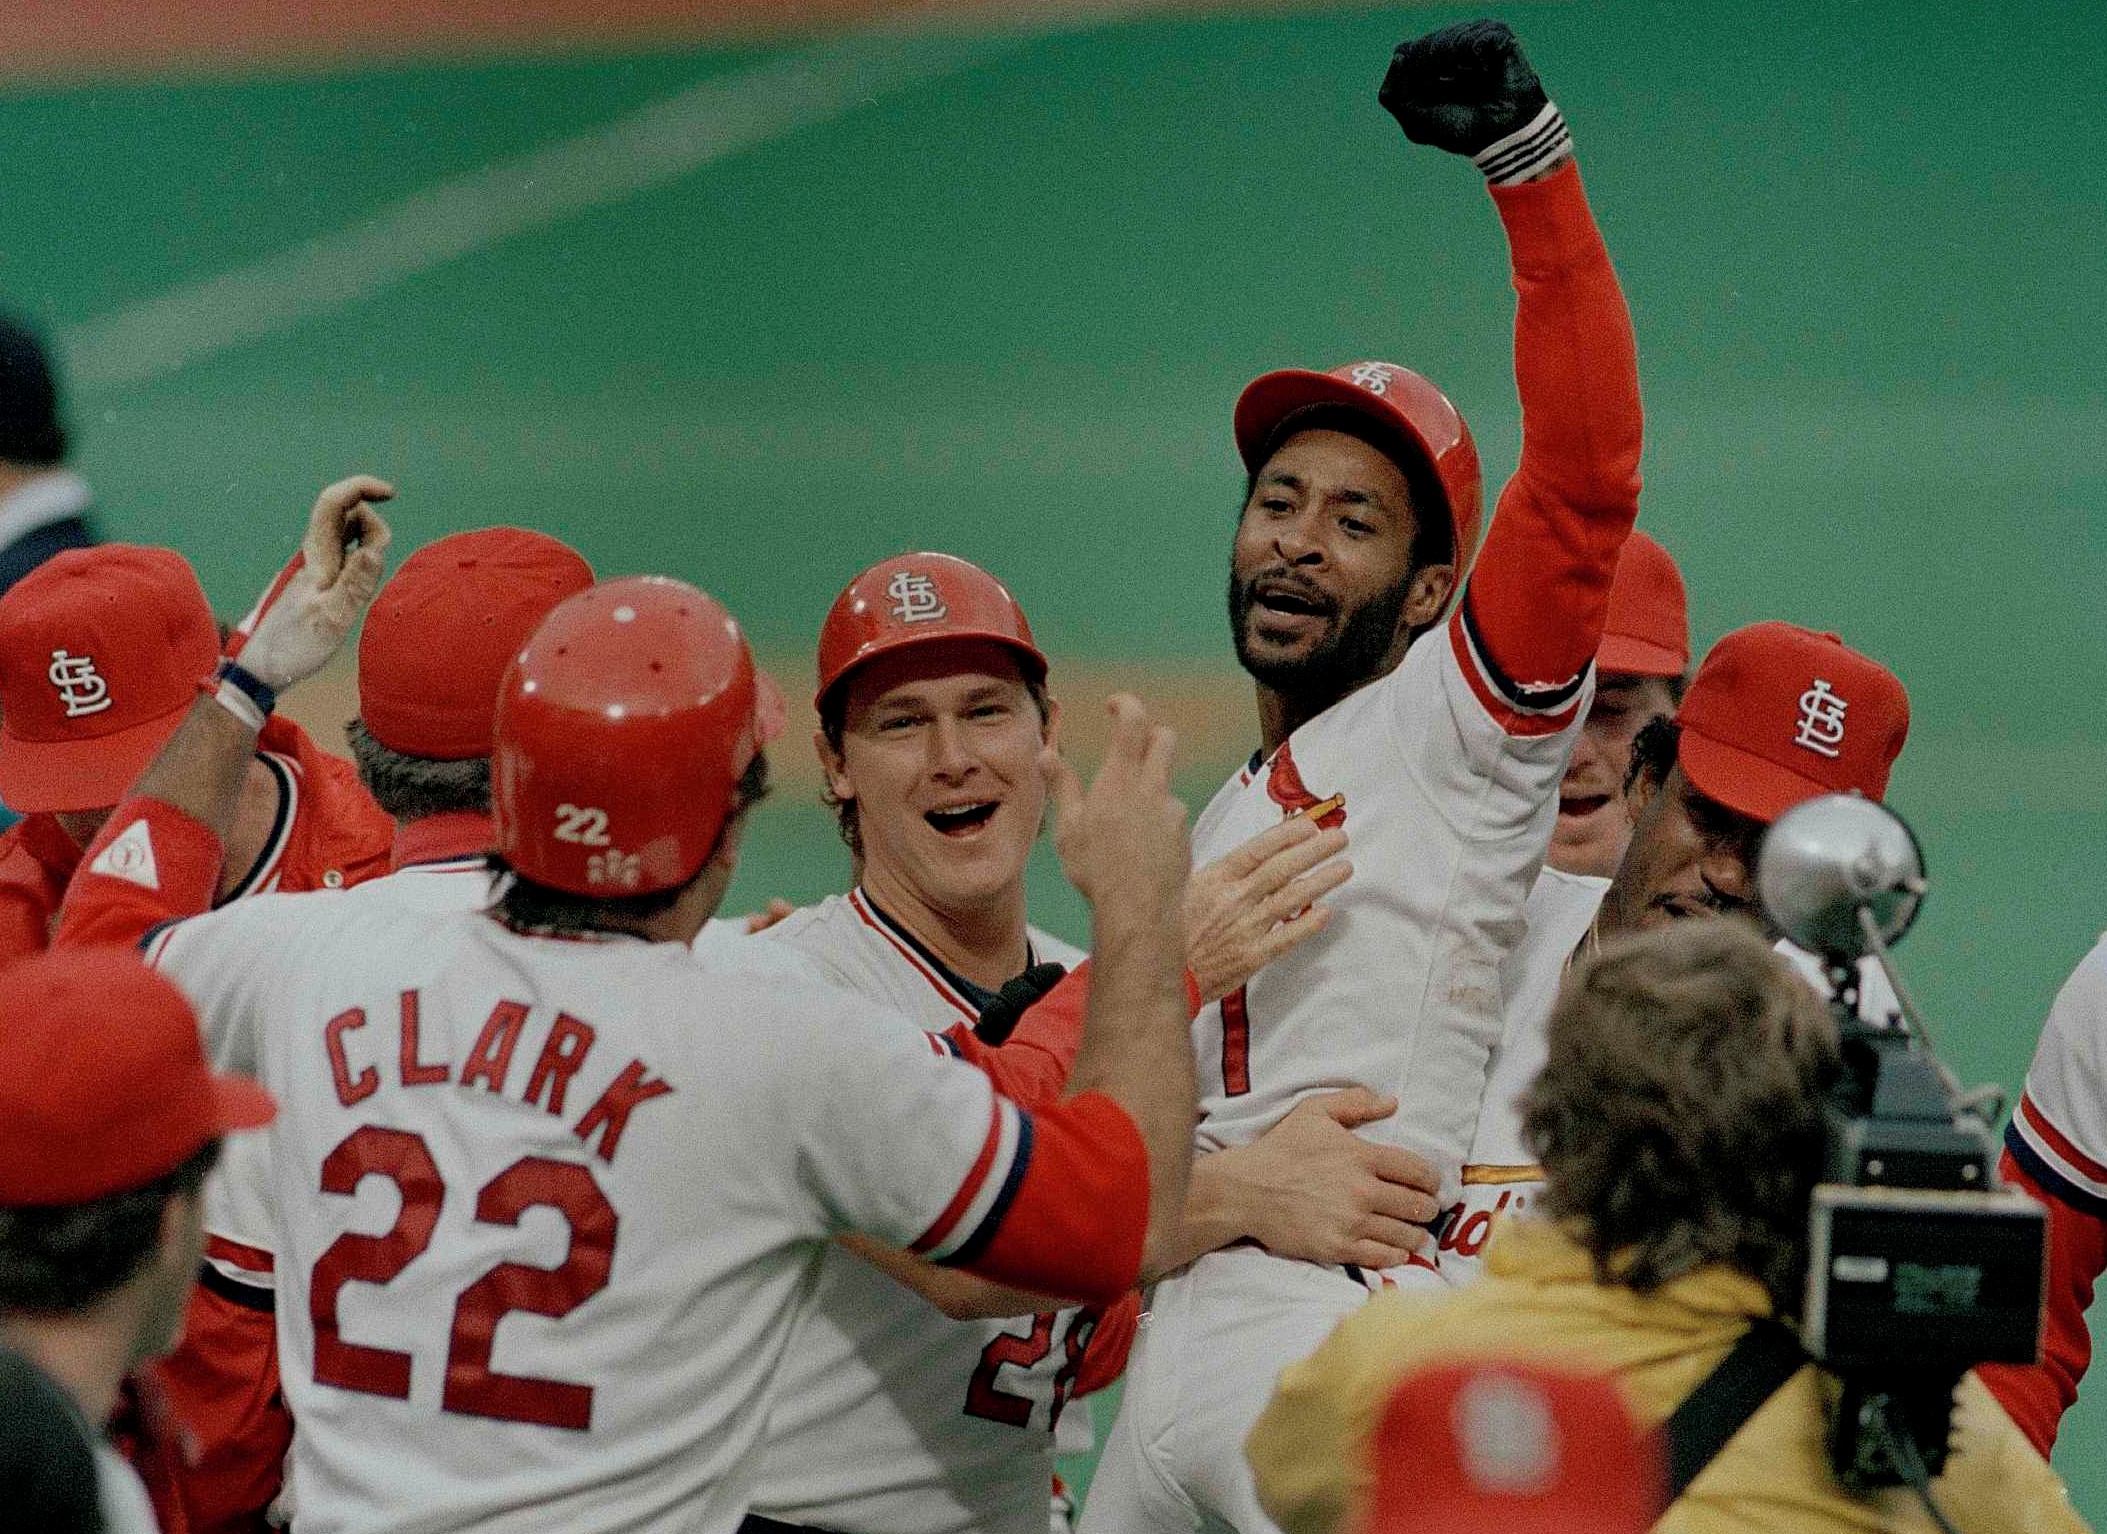 Cardinals fan can turn double plays with Ozzie Smith